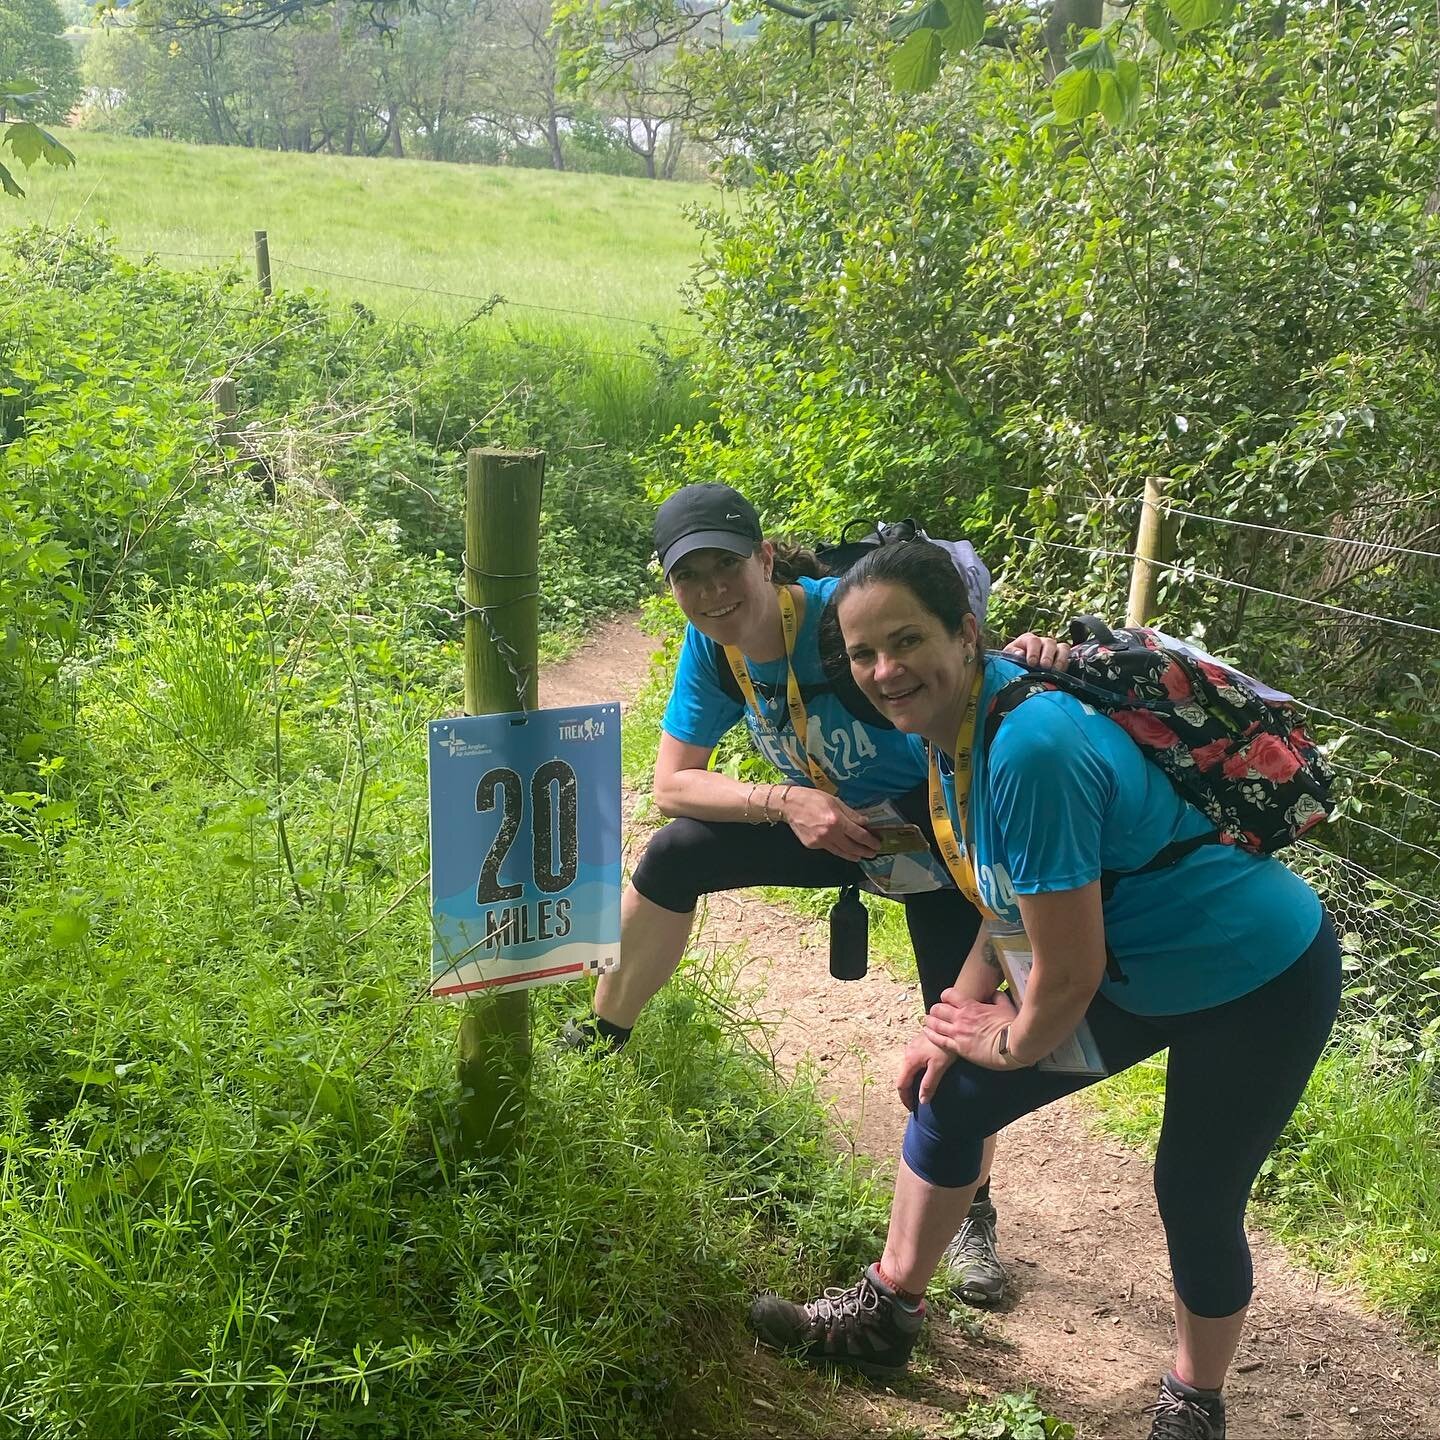 On Saturday I took part in my second 24mile walk in aid of @eastangliairamb from Reedham Ferry on the Norfolk Broads to Whitlingham Country Park in Norwich. It was another beautiful day in the fun company of my friend Amanda. If you would would like 